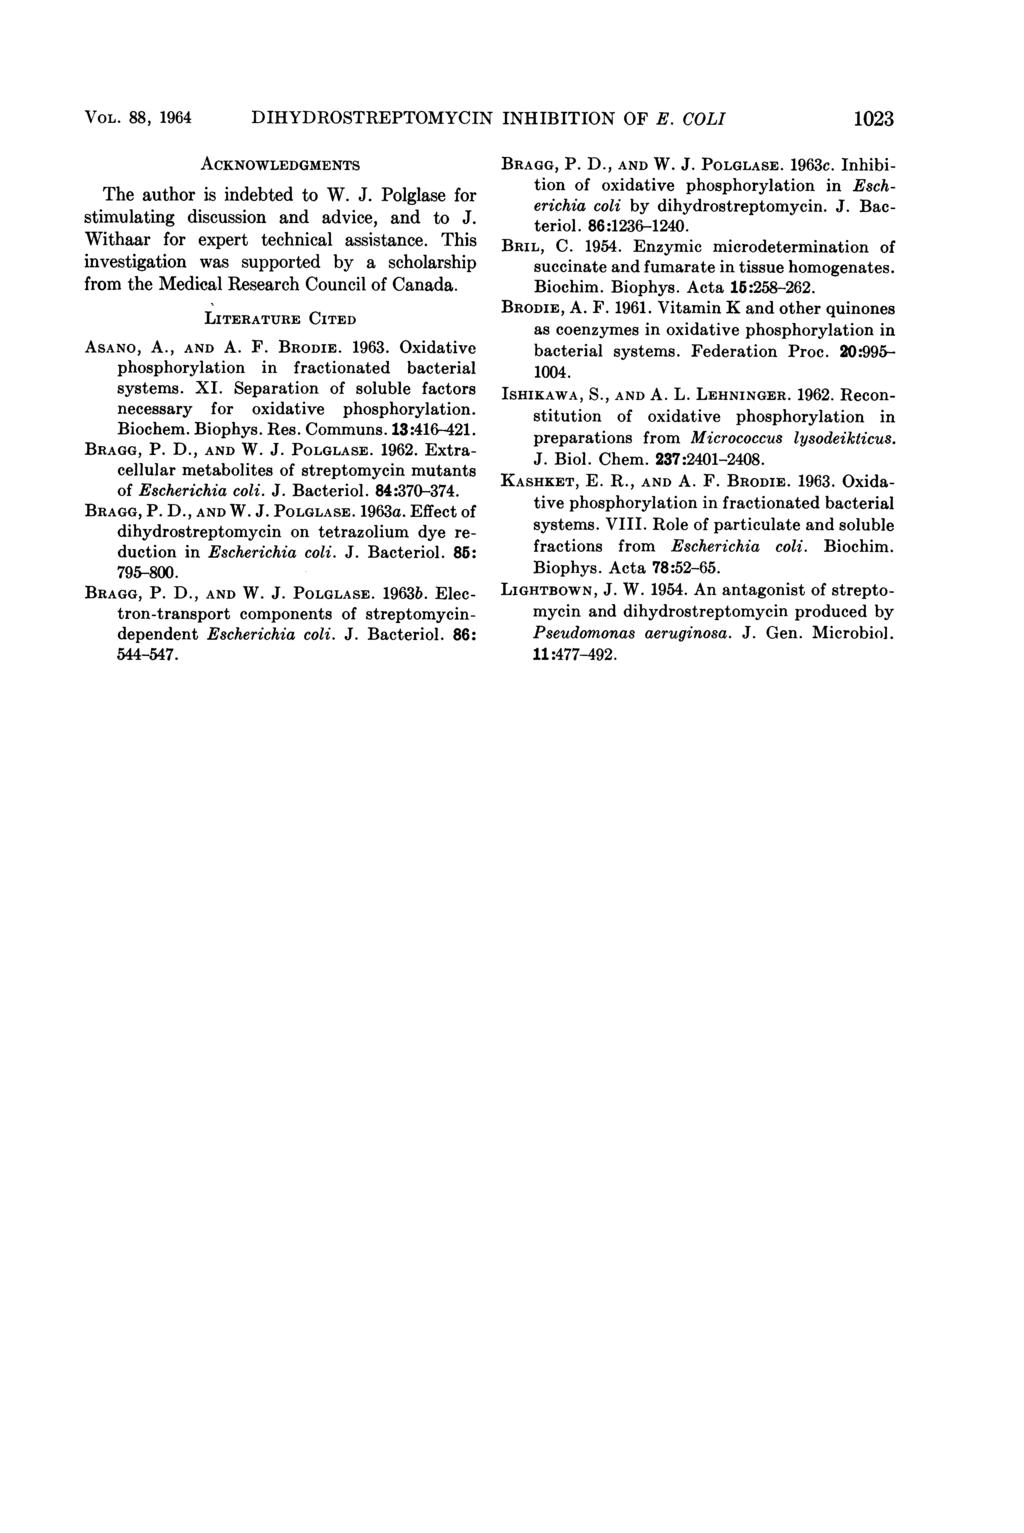 VOL. 88, 1964 DIHYDROSTREPTOMYCIN INHIBITION OF E. COLI 1023 ACKNOWLEDGMENTS The author is indebted to W. J. Polglase for stimulating discussion and advice, and to J.